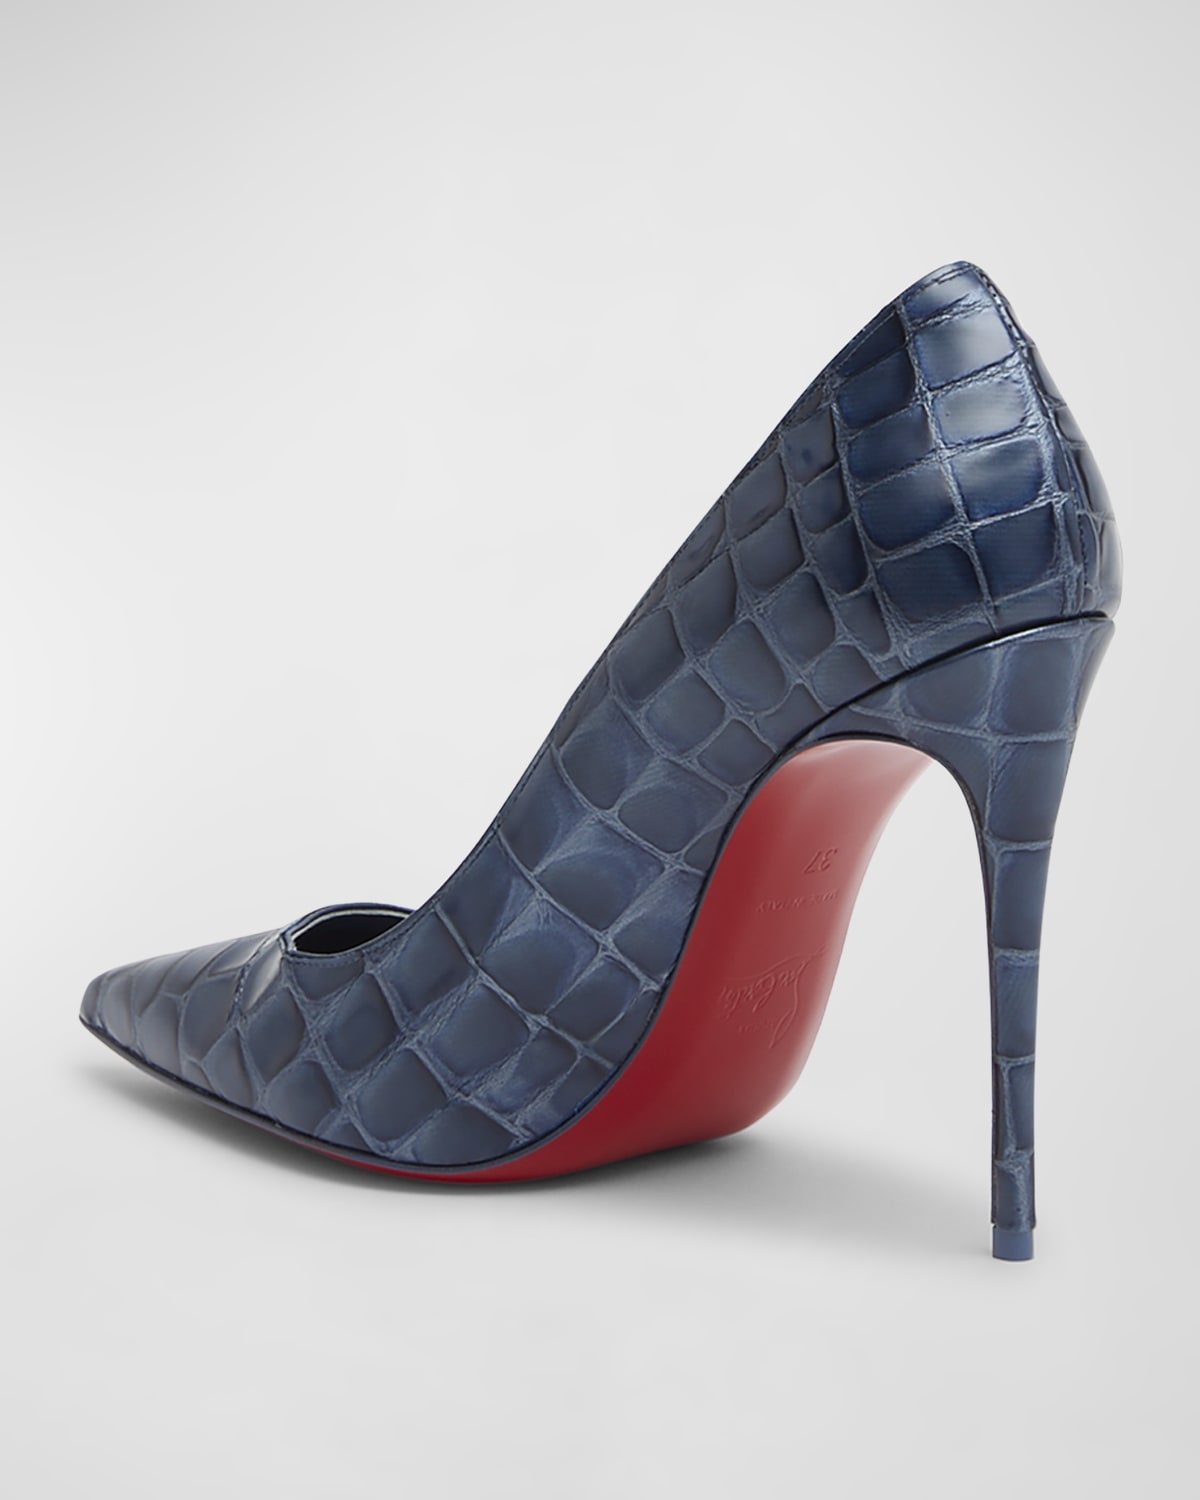 Kate Croco Red Sole Classic Pumps - 3